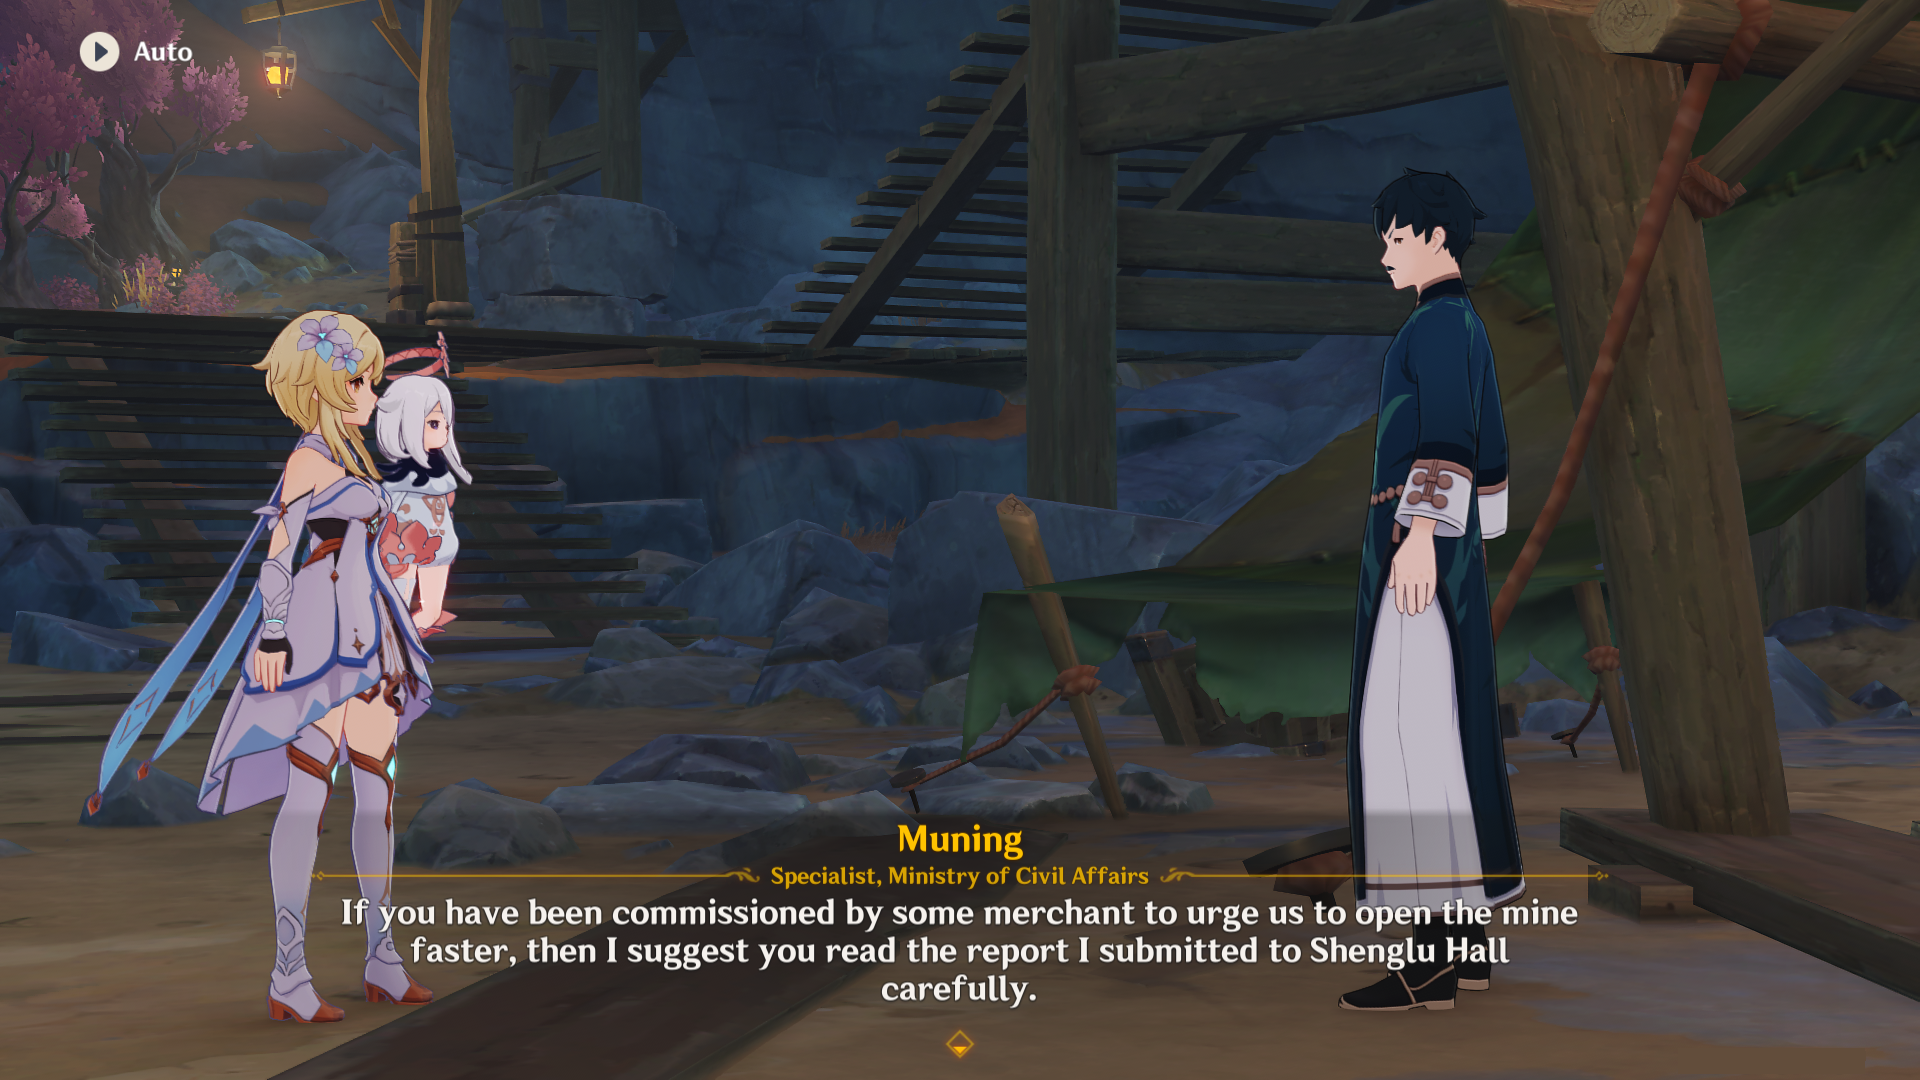 Lumine and Paimon speak to Muning, a new NPC, in Genshin Impact's newest area The Chasm.